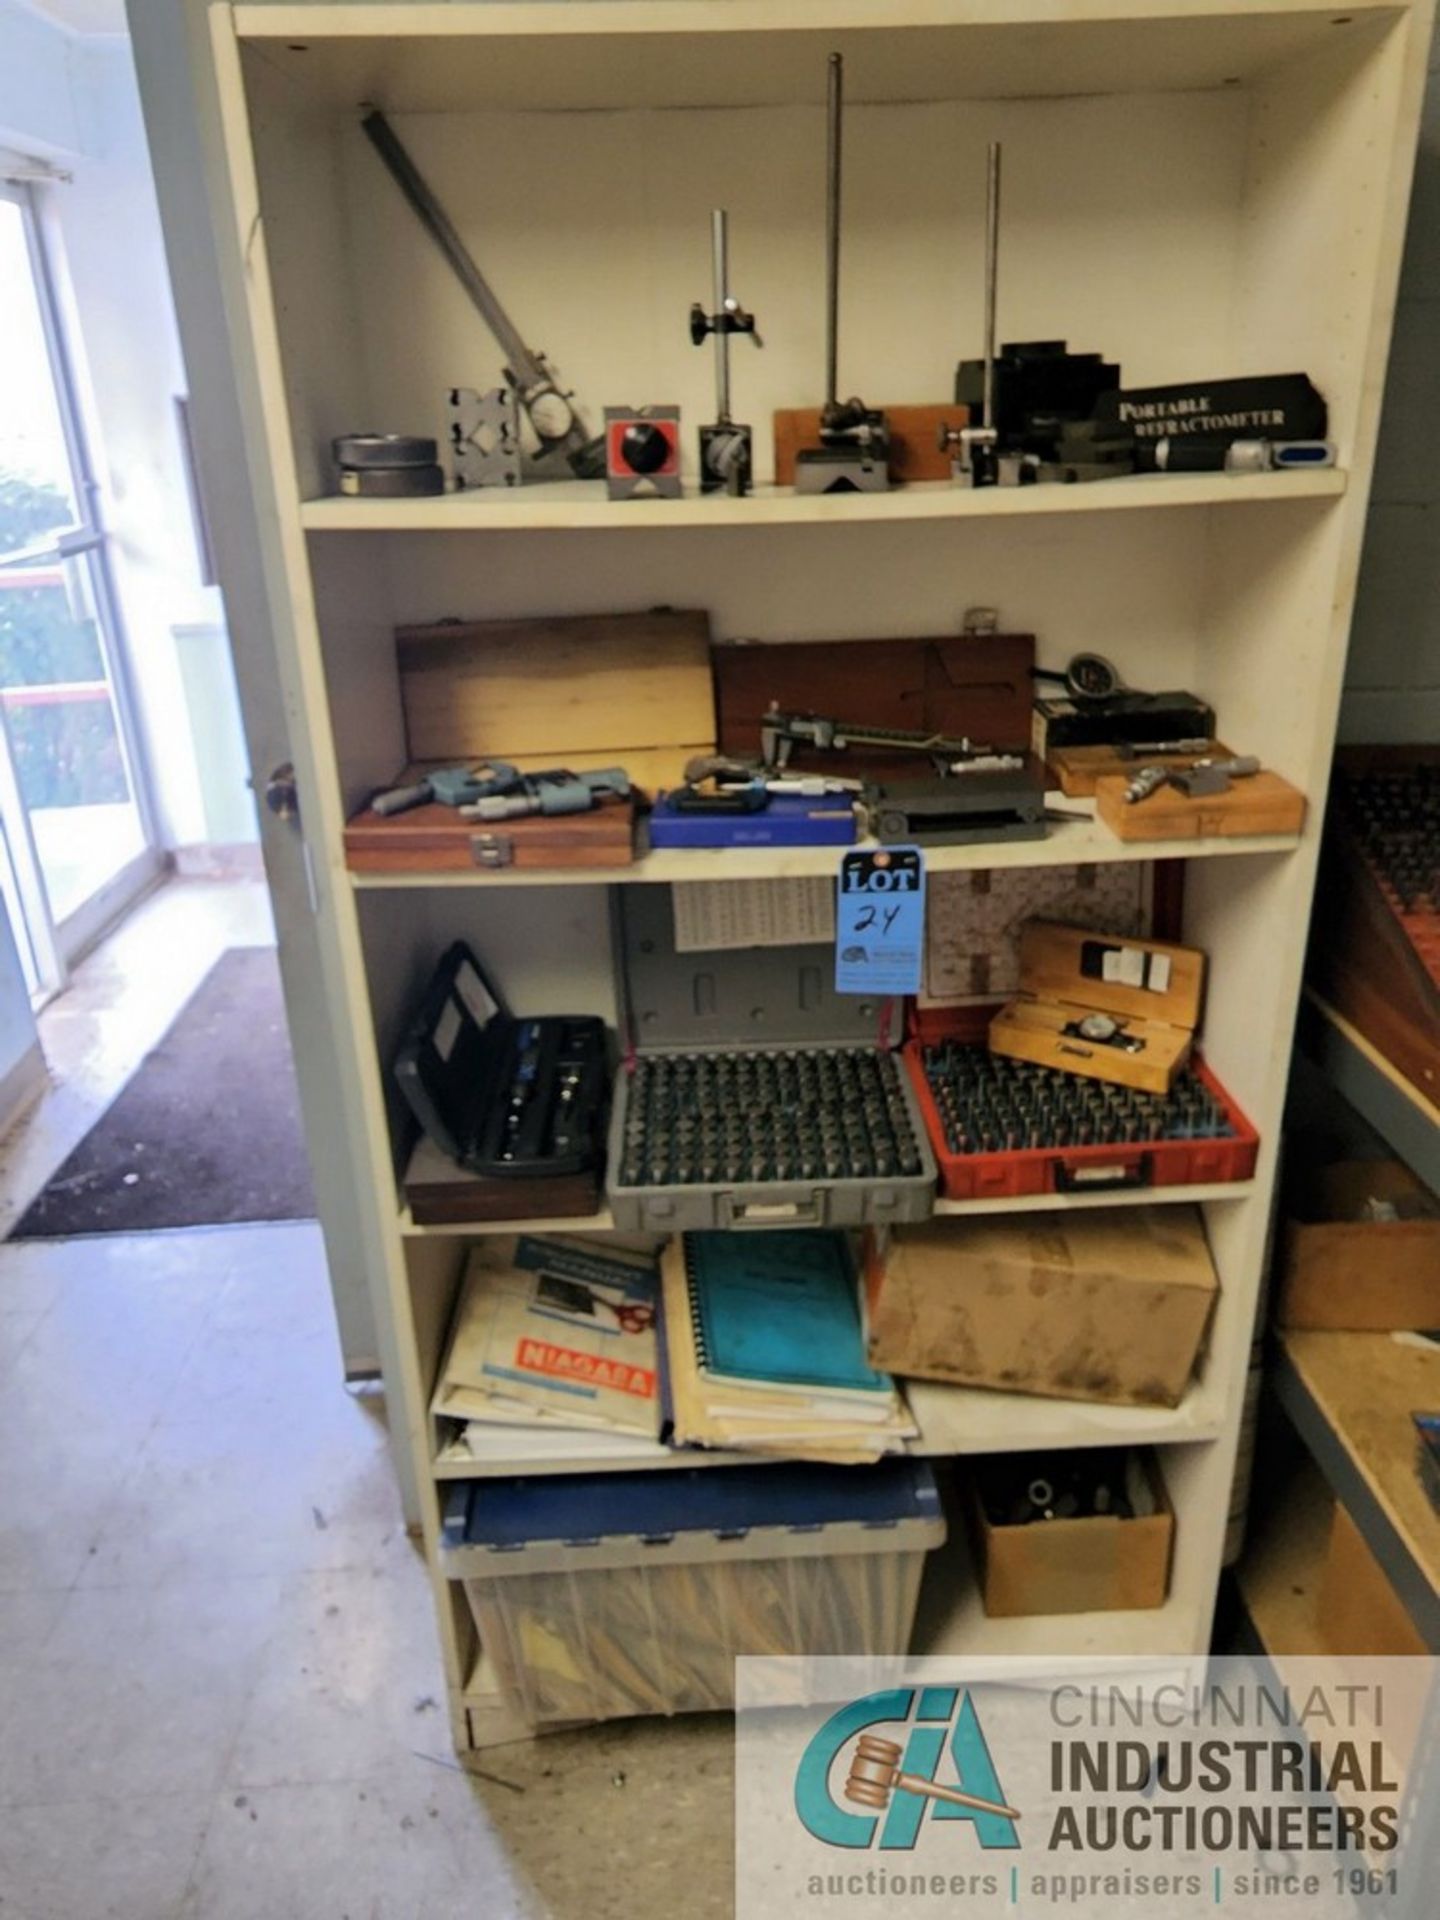 (LOT) INSPECTION ITEMS ON SHELF UNIT; PIN GAGES, SMALL MICROMETERS, V-BLOCKS & OTHER